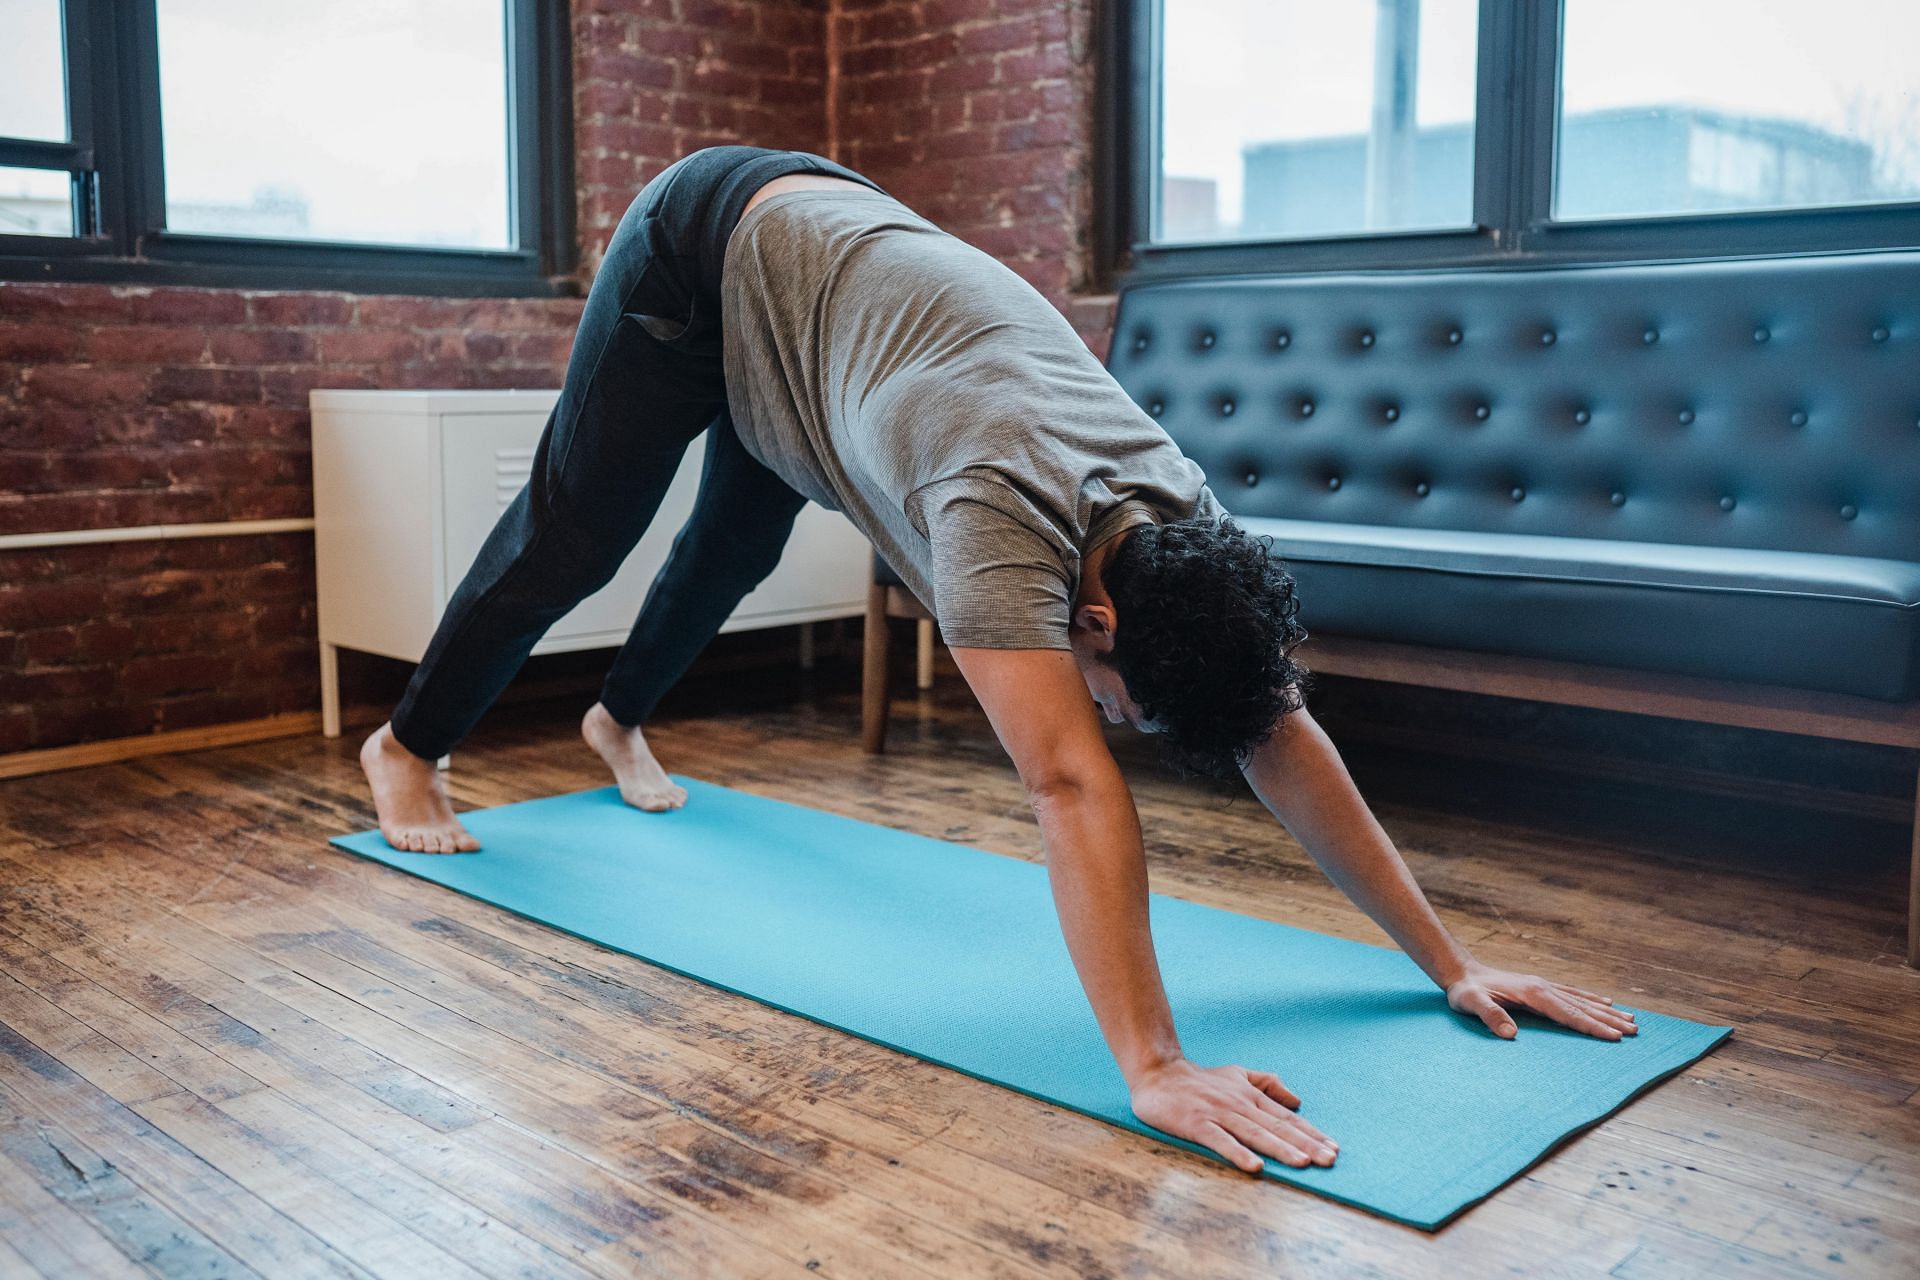 Downward facing dog pose is one of the best exercises to relieve tired legs (Image via Pexels @Klaus Nielsen)